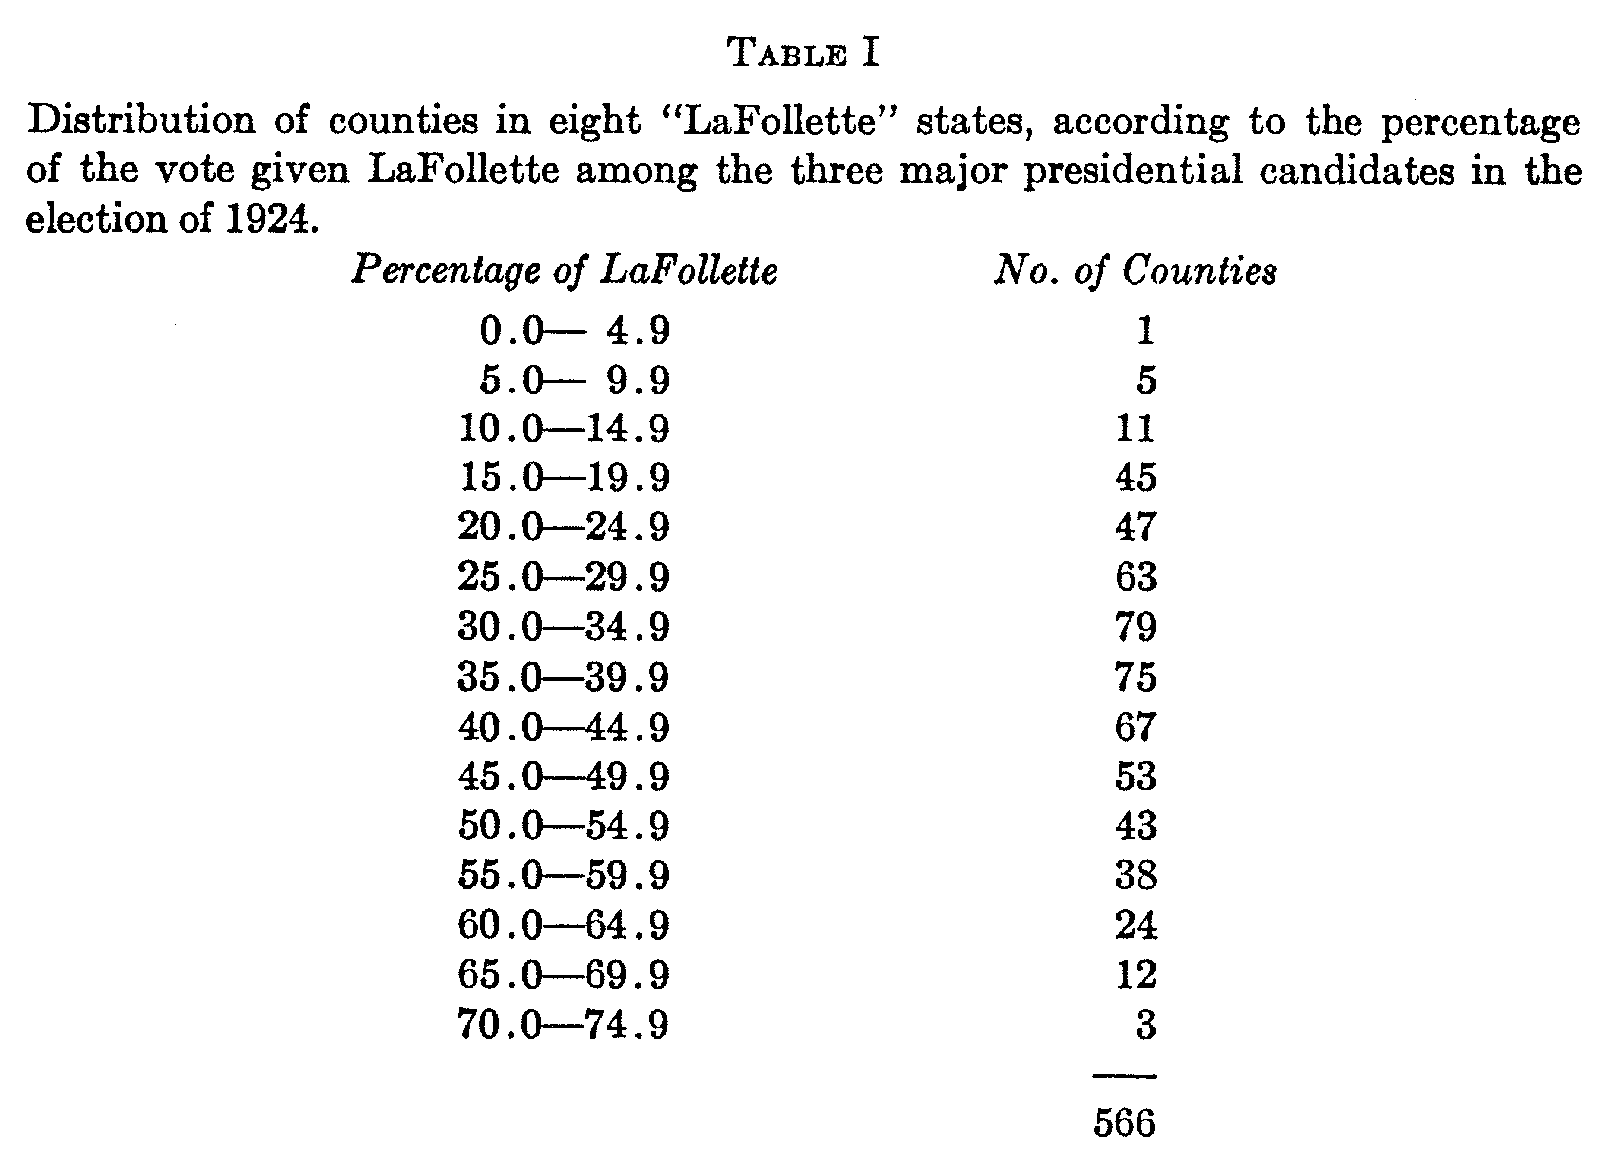 Table 1 Distribution of counties in 8 LaFollette states